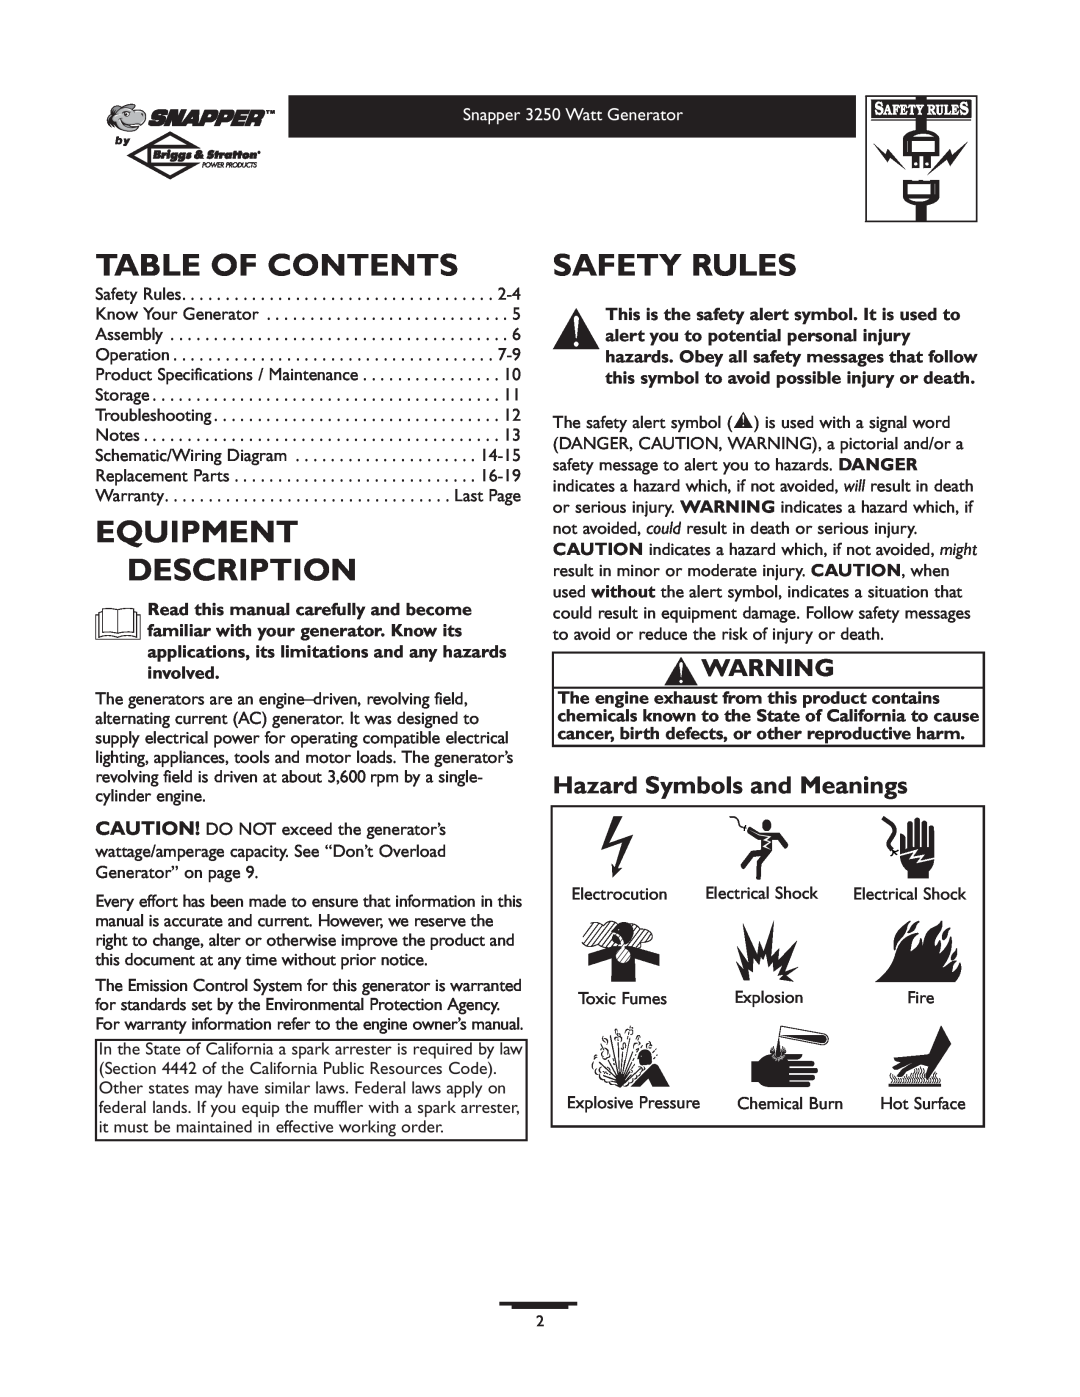 Snapper 3250 owner manual Table Of Contents, Equipment Description, Safety Rules, Hazard Symbols and Meanings 